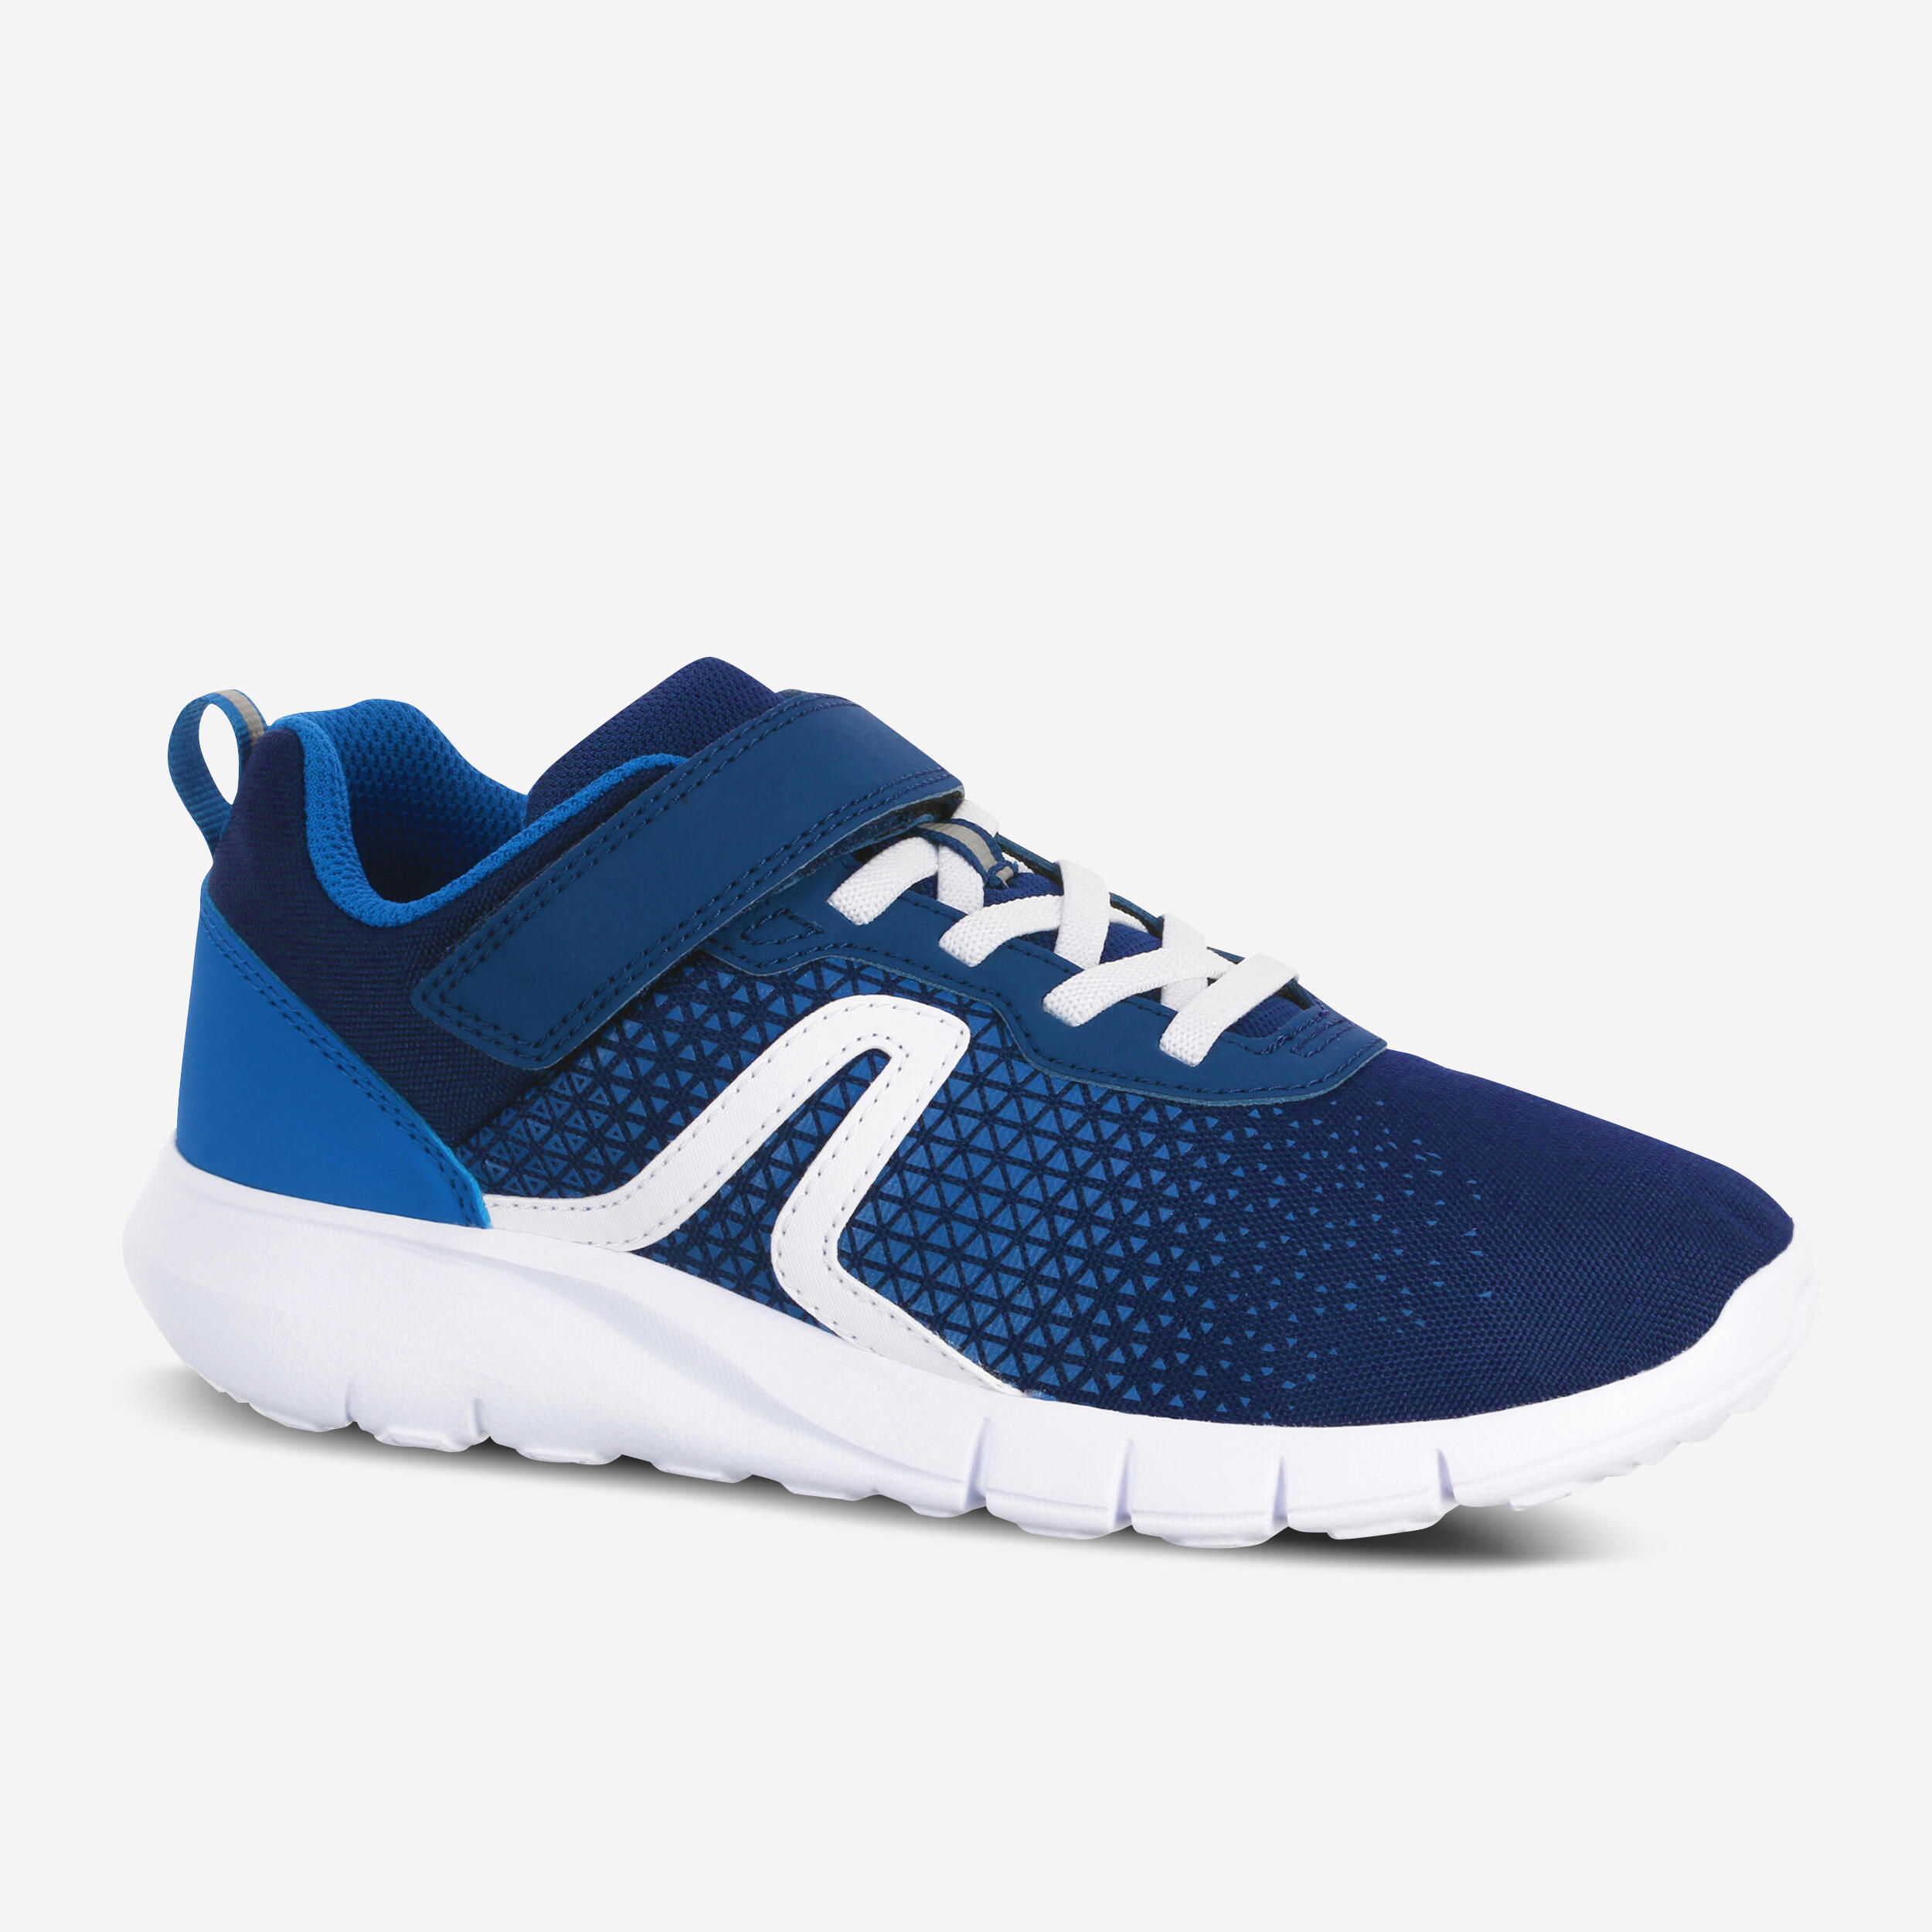 High Neck Shoes - Buy High Neck Shoes Online in India | Myntra